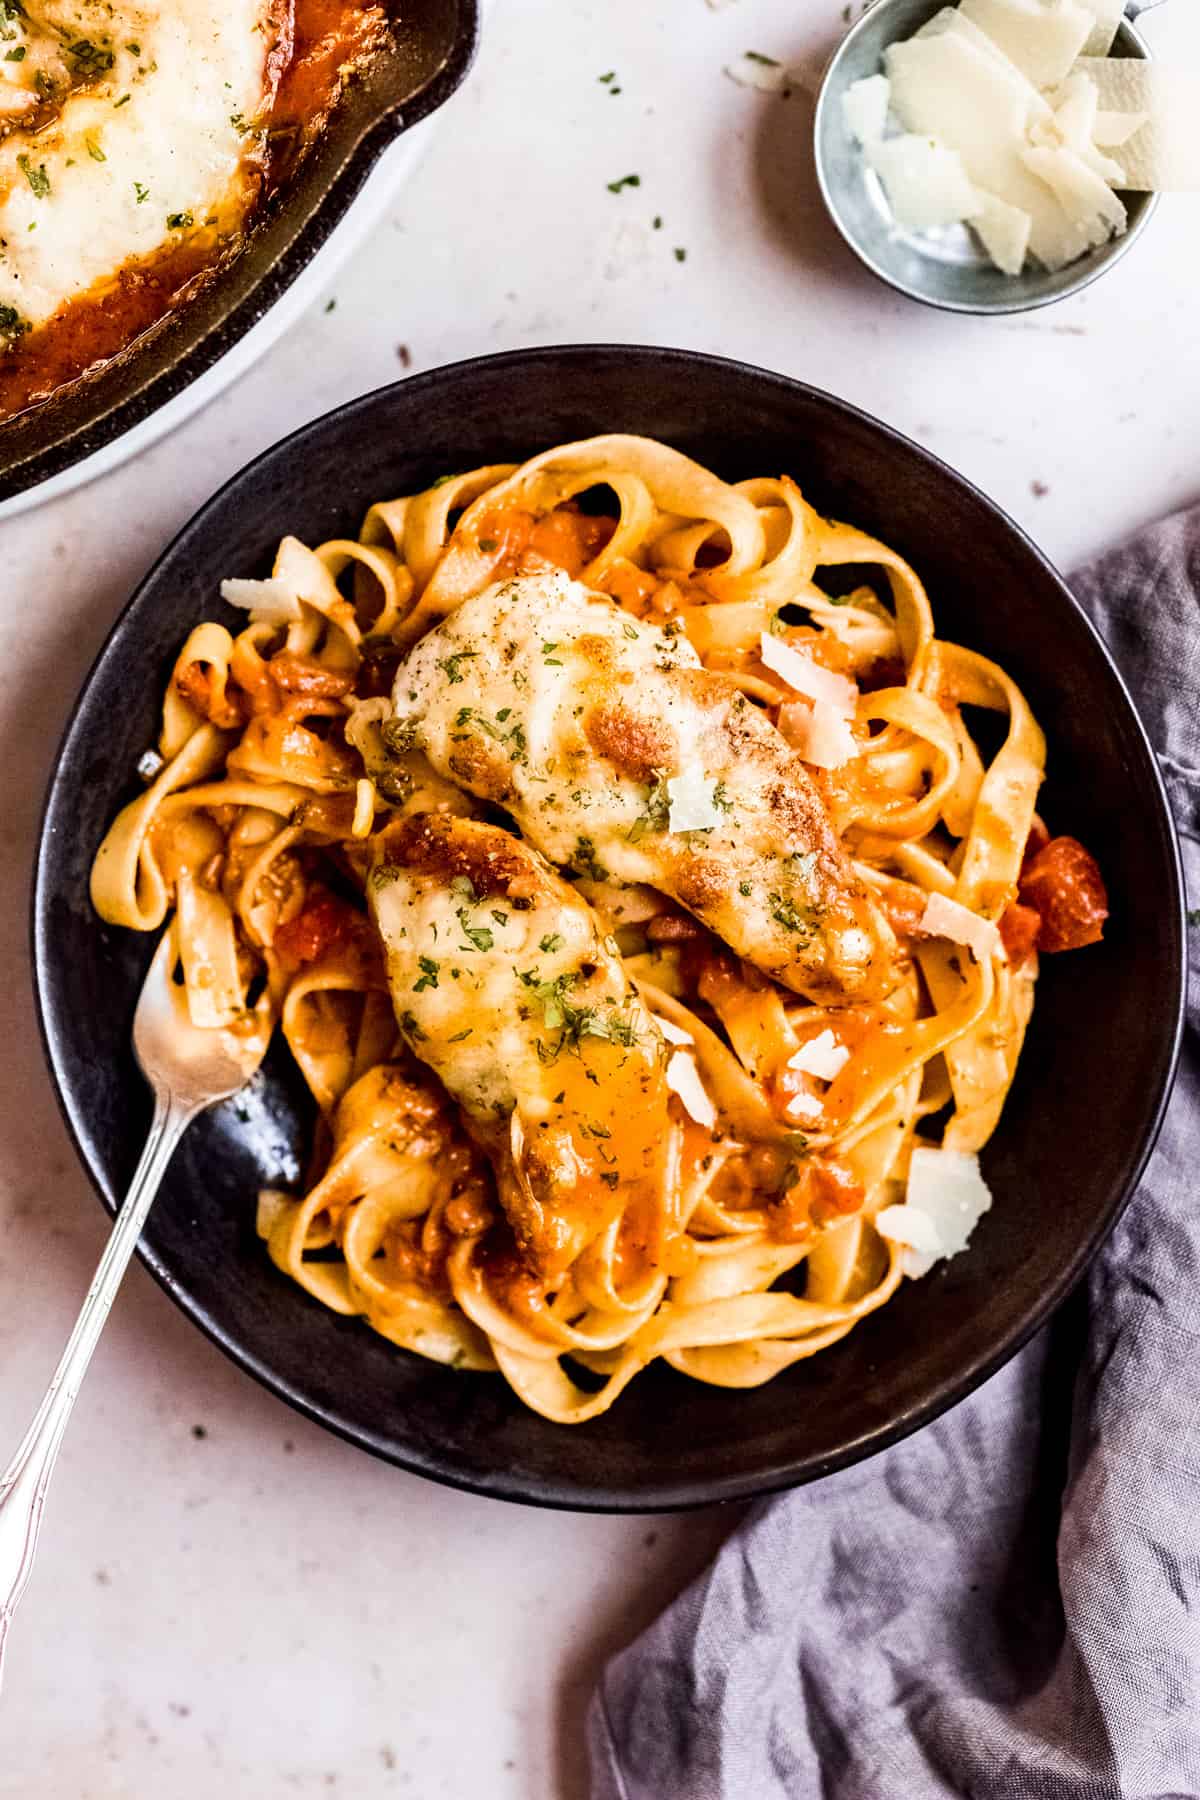 Chicken in tomato sauce on a bed of pasta